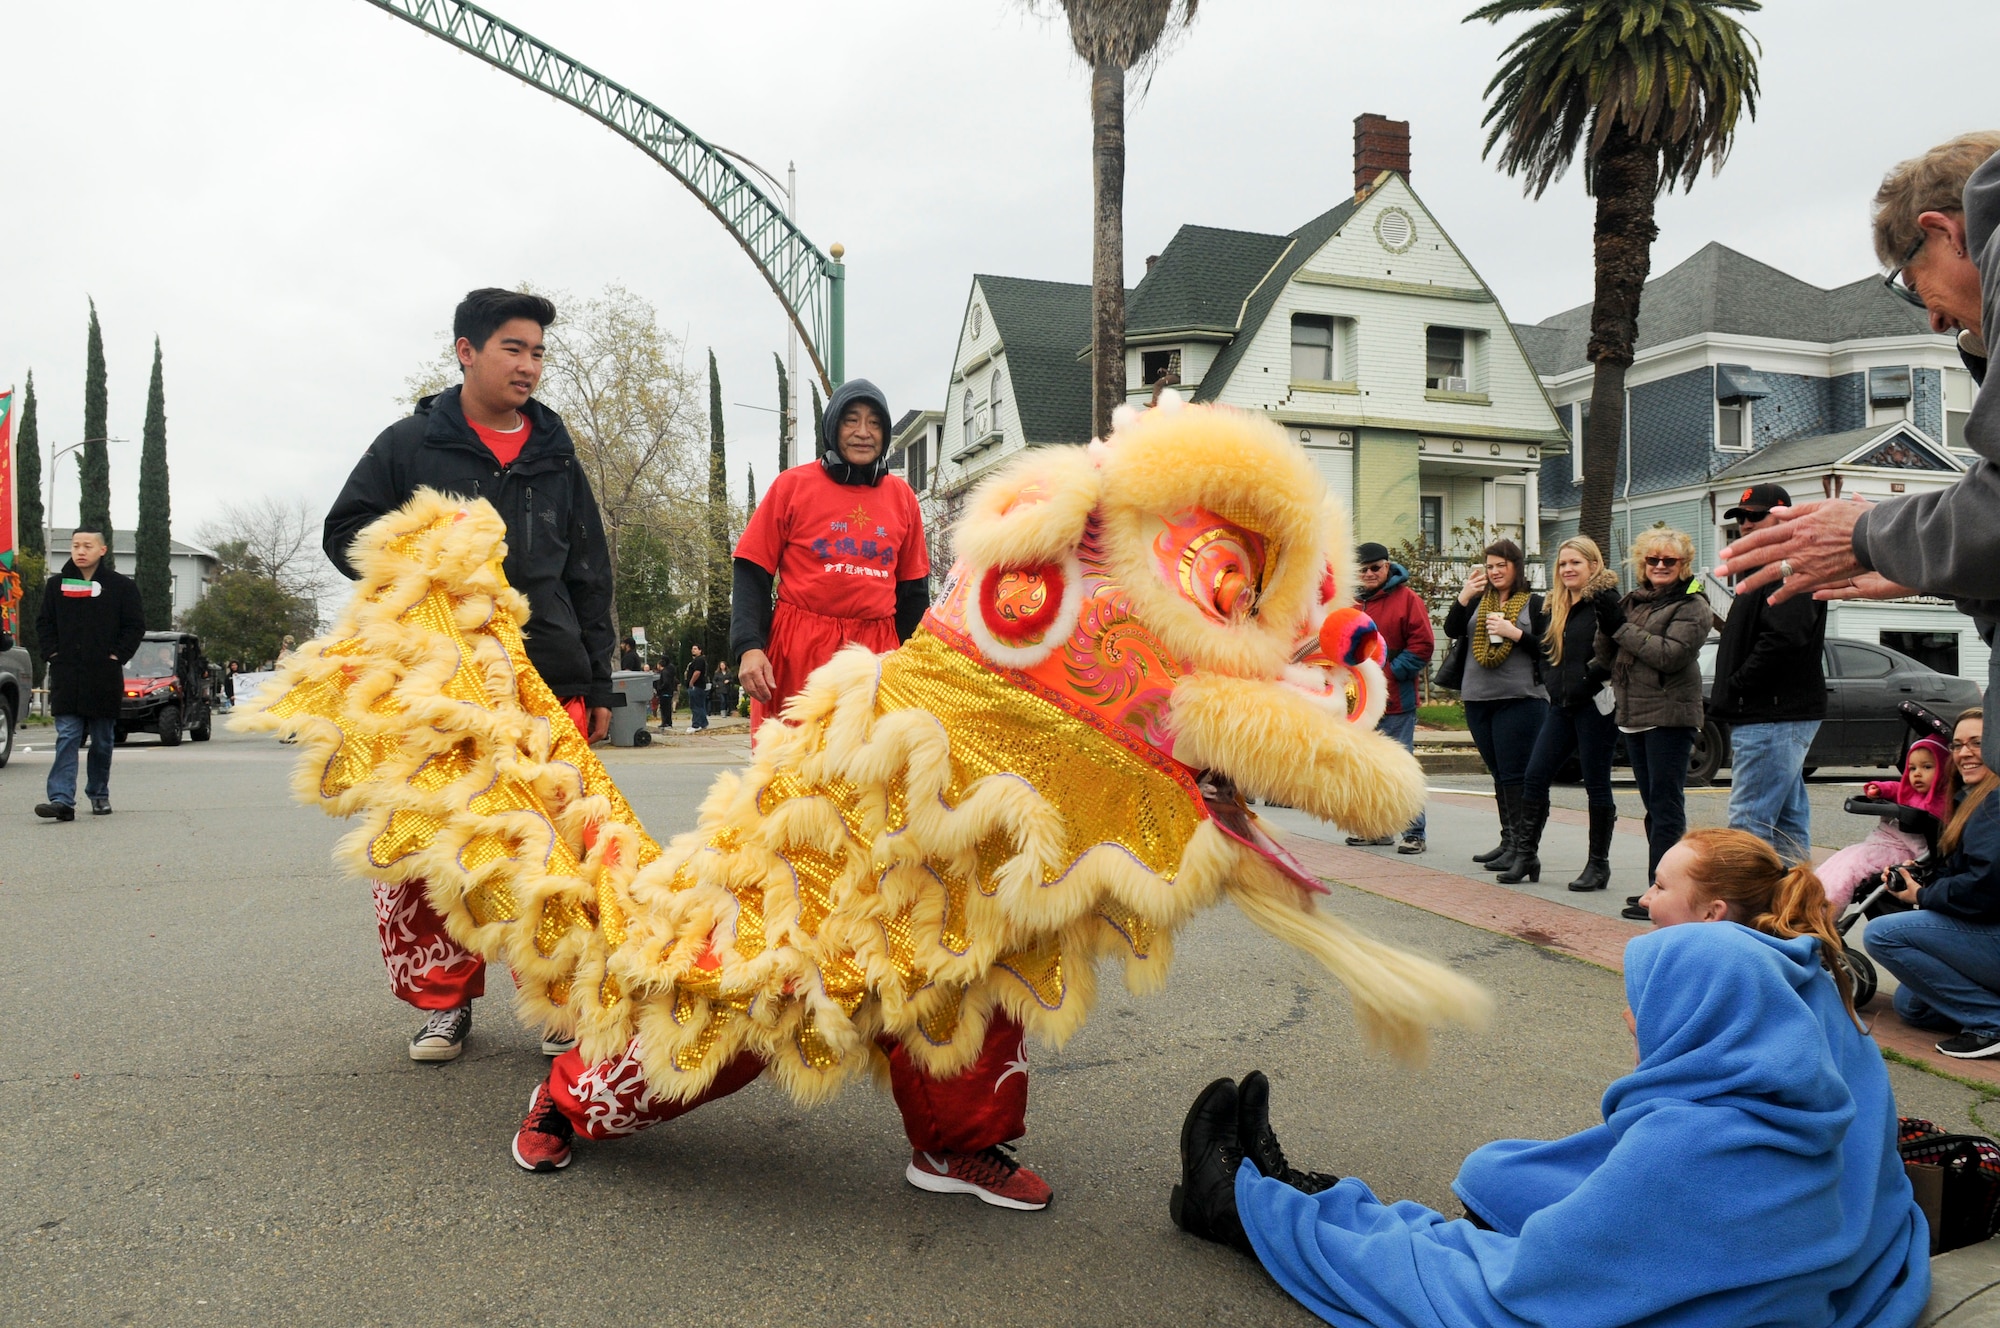 San Francisco Lion Dancers interact with Bok Kai Festival patrons in Marysville, California, Mar. 12, 2016. The Bok Kai Festival has been a 136-year tradition for the historic Chinatown in Marysville. The event brought multiple groups from many parts of the world to participate. 